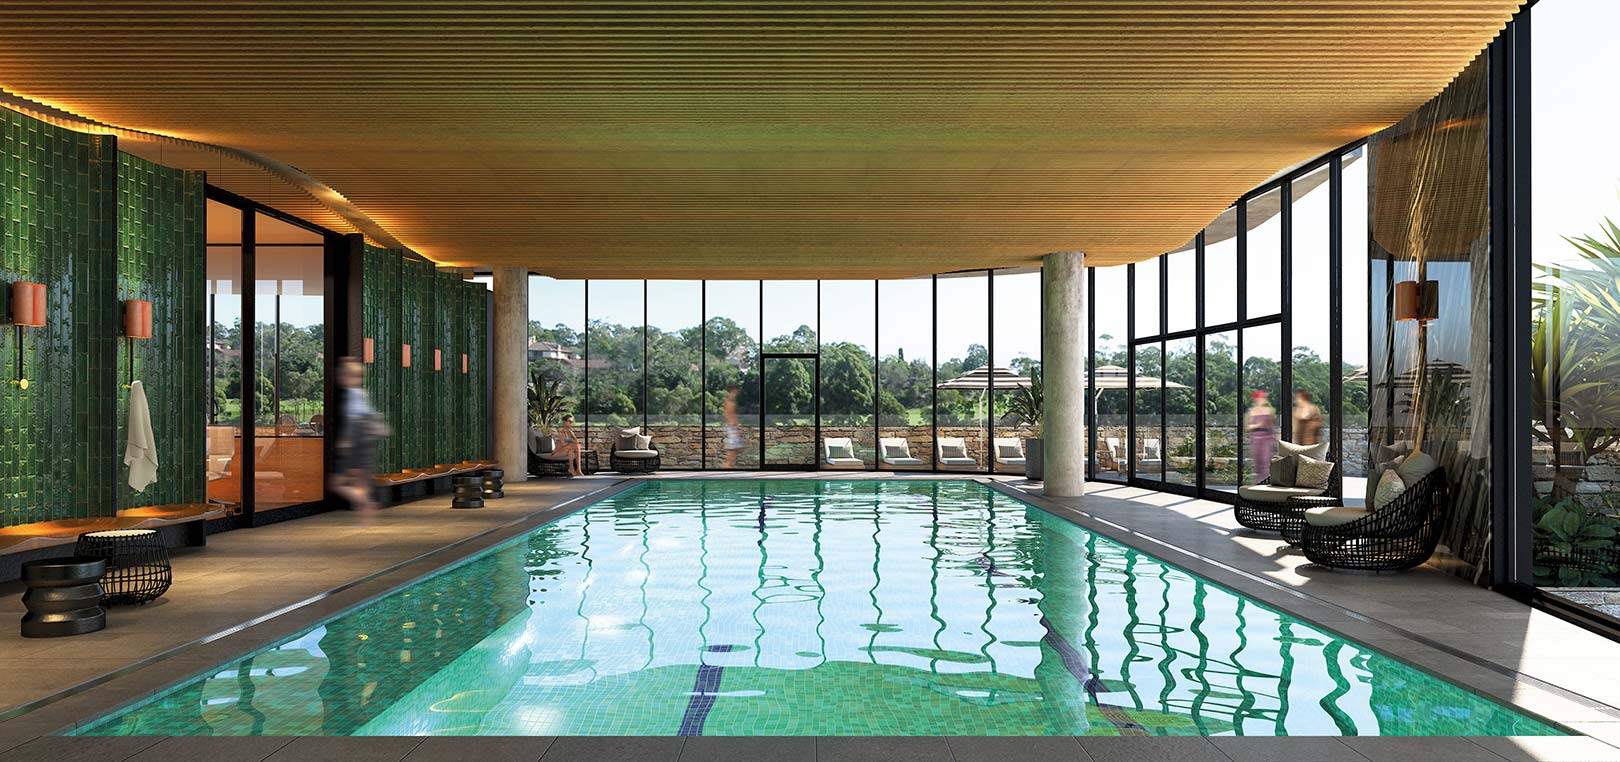 Watermark Residences - Hydrotherapy pool